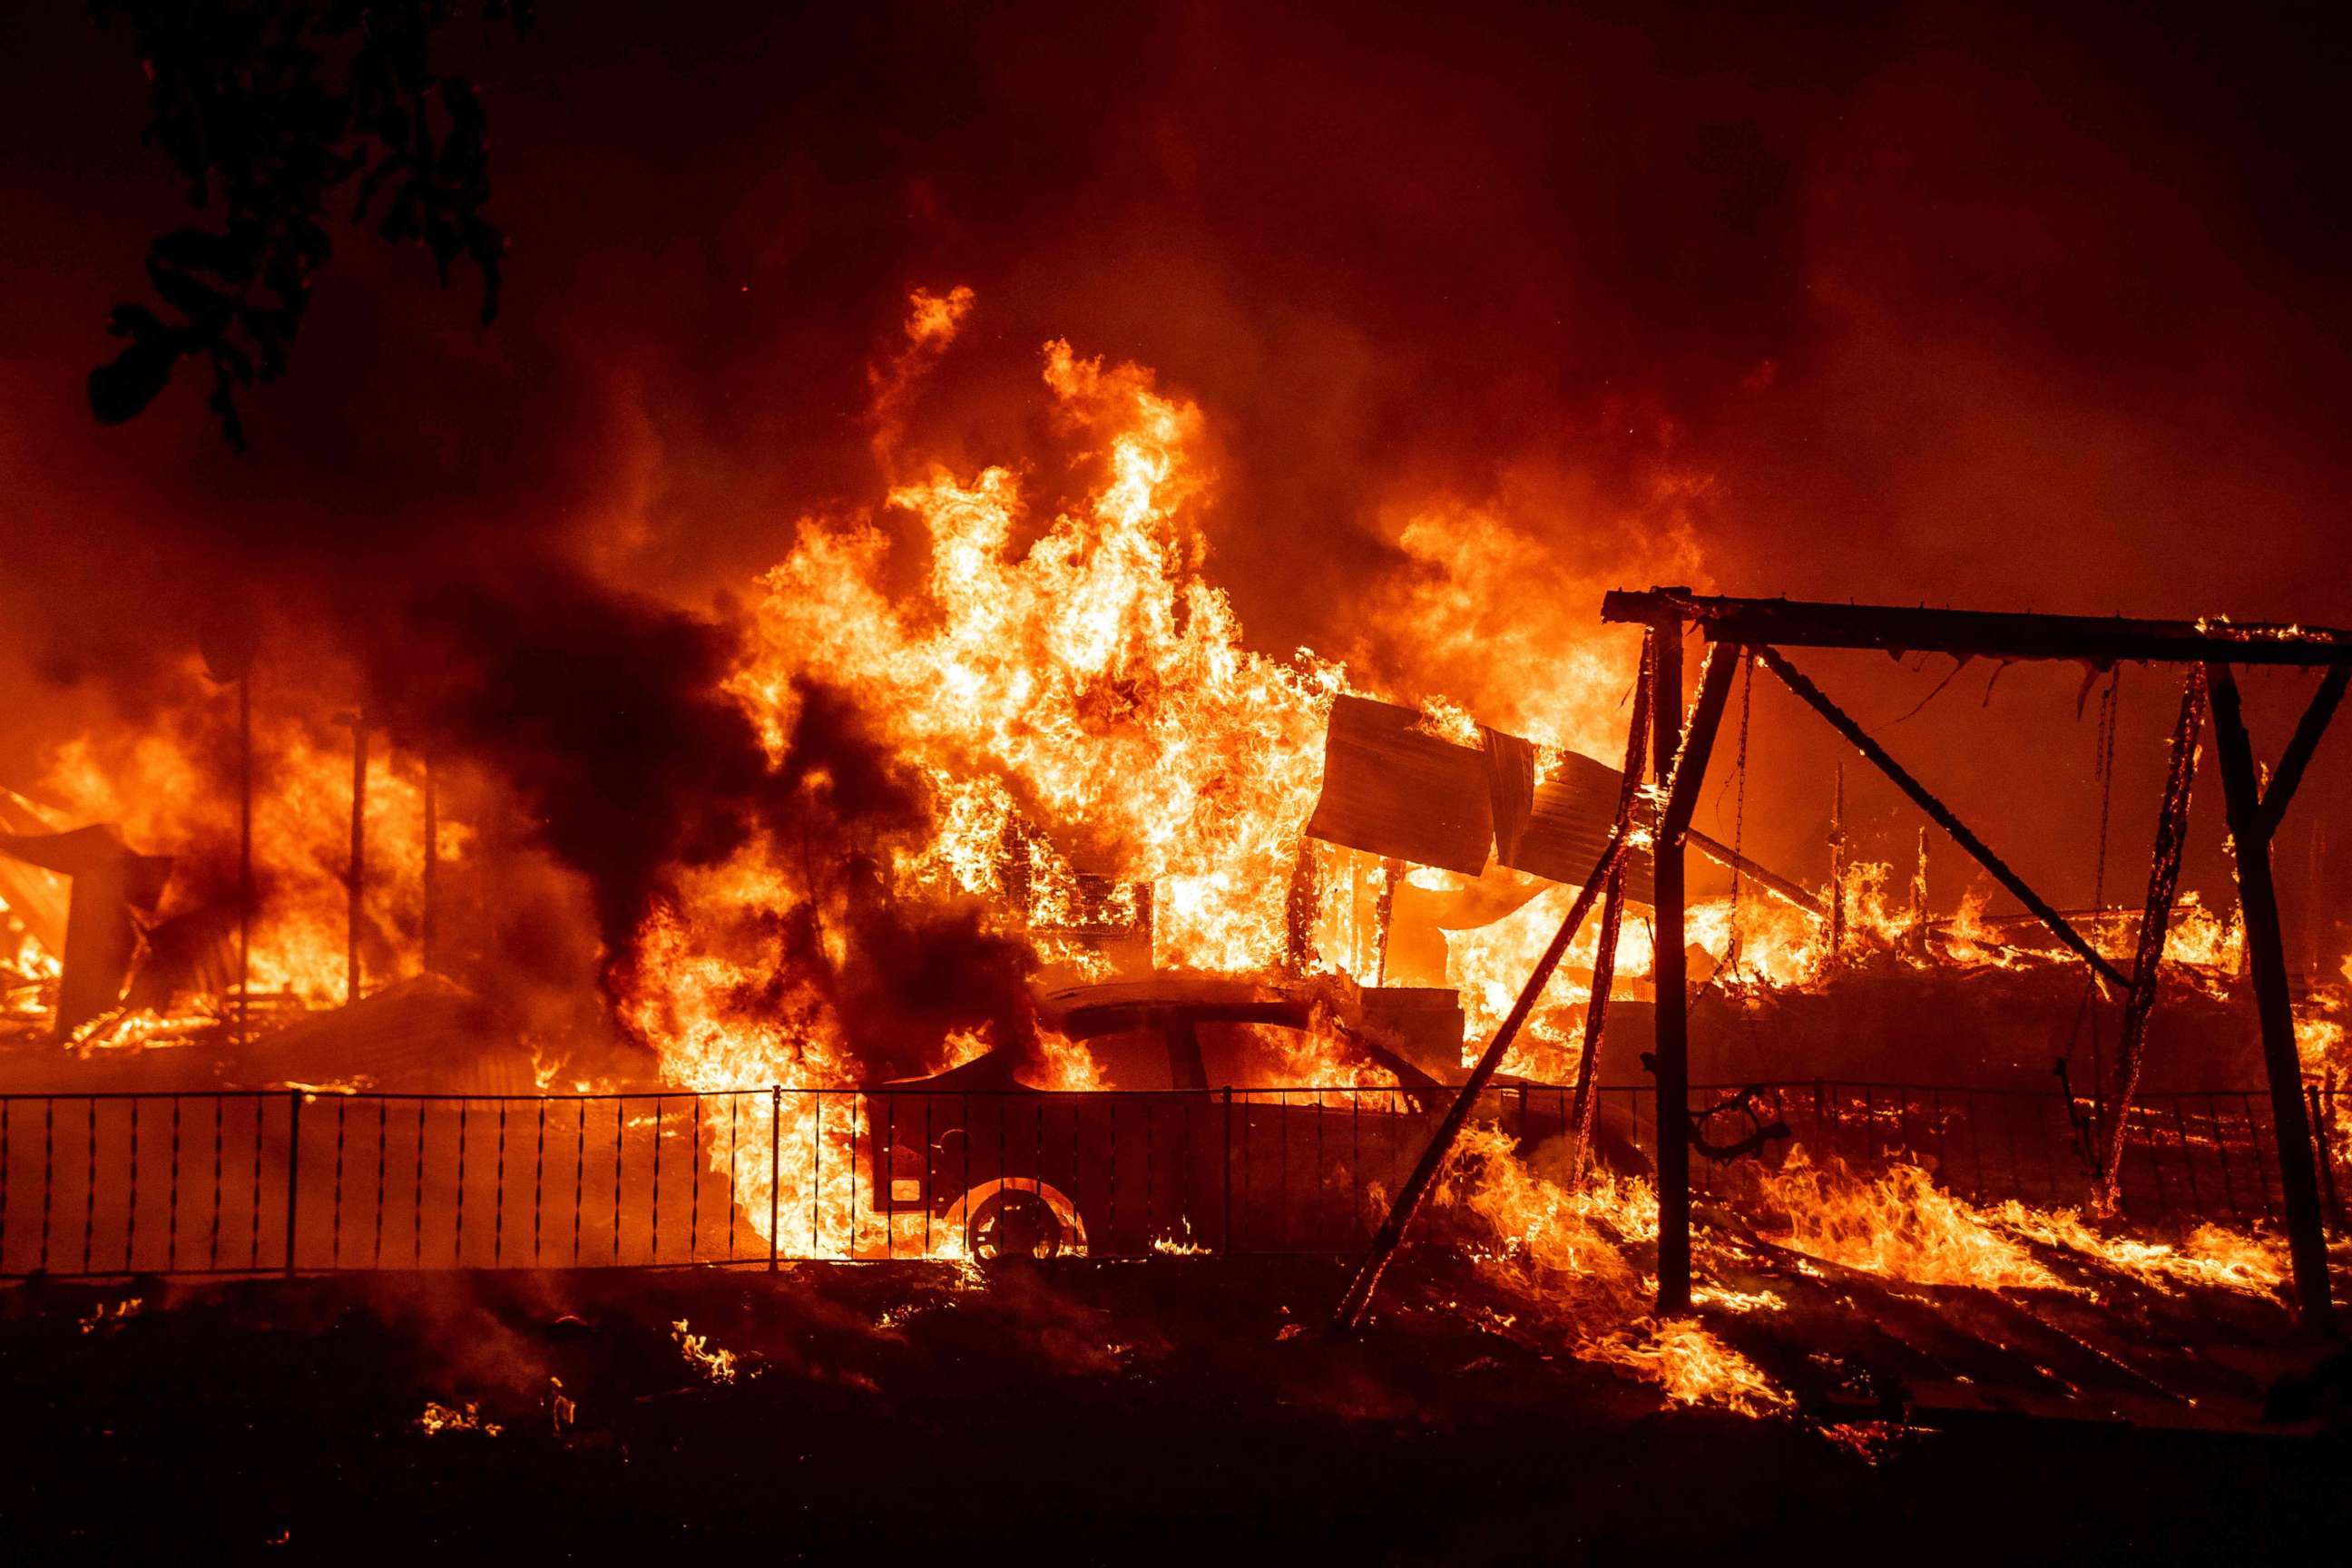 PHOTO: A home burns during the Bear fire, part of the North Lightning Complex fires in the Berry Creek area of unincorporated Butte County, California on Sept. 9, 2020.